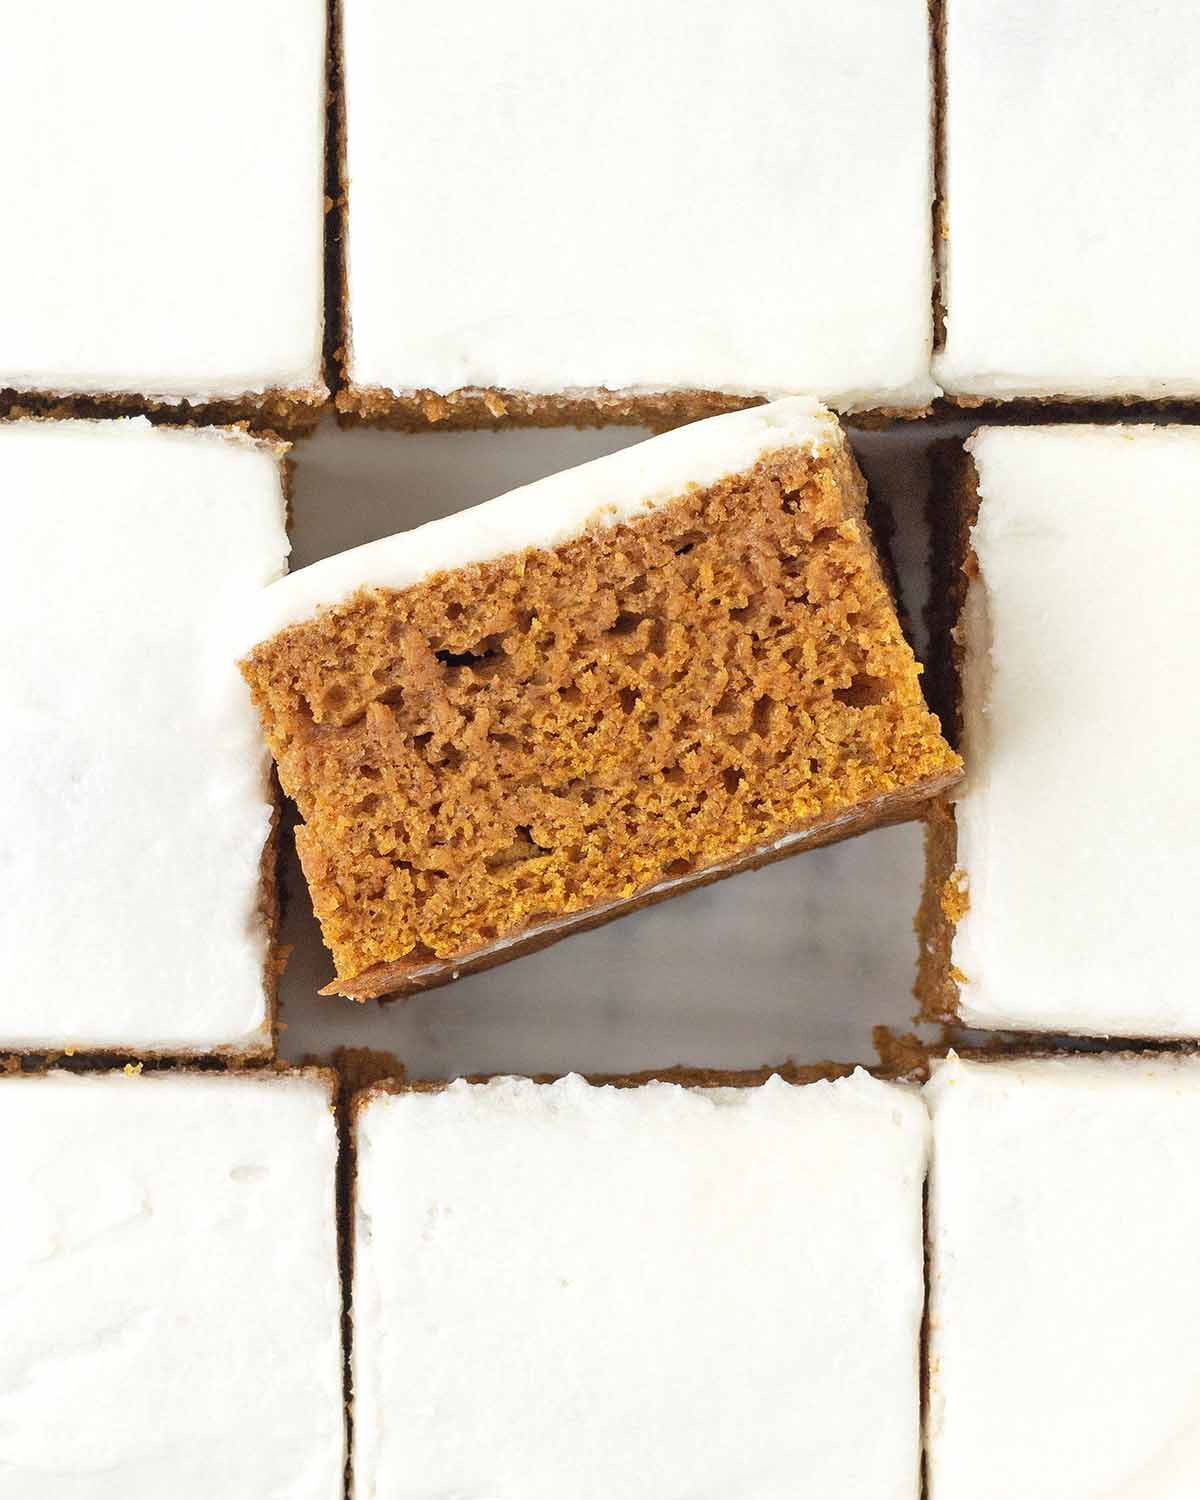 An overhead image of frosted and sliced pumpkin bars, the bar in the middle is turned on its side to show the texture.